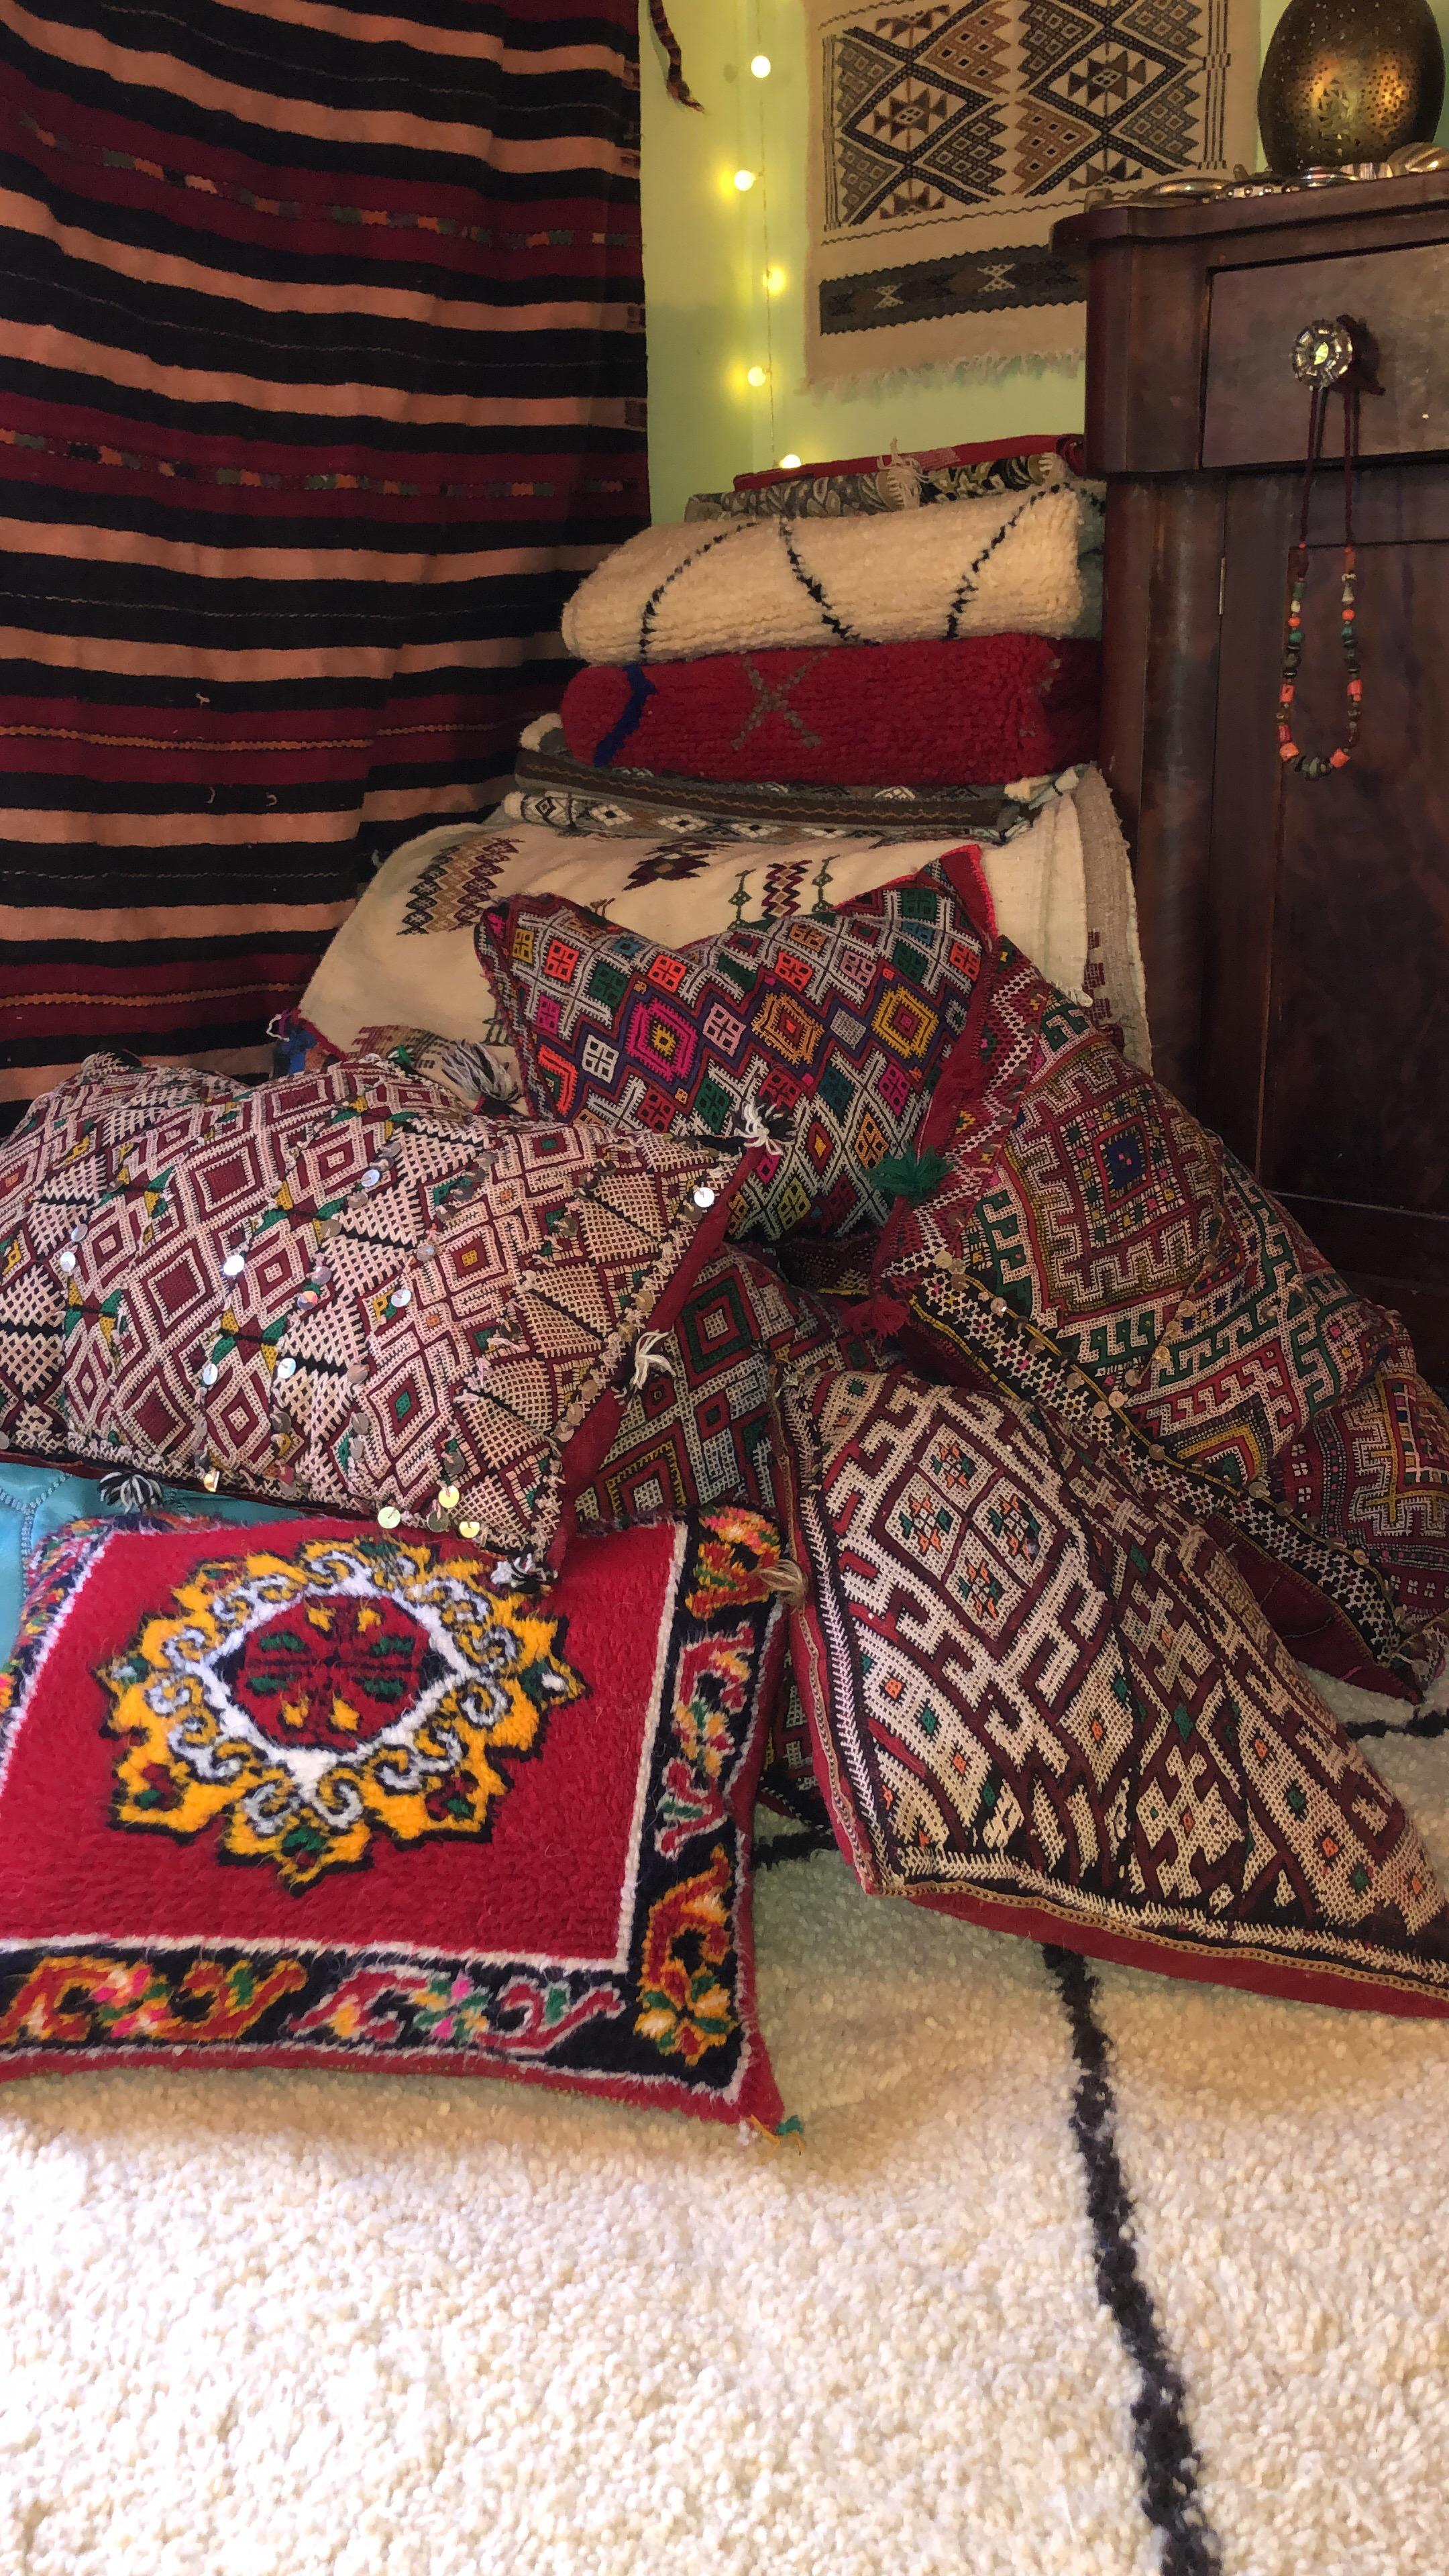 This cheery, colorful handmade pillow adds an exotic Bohemian feel to any room. Decorated with geometric designs that mimic Berber tribal tattoos, as well as other symbolic imagery like the evil eye. Each pillow is one-of-a-kind, handwoven by